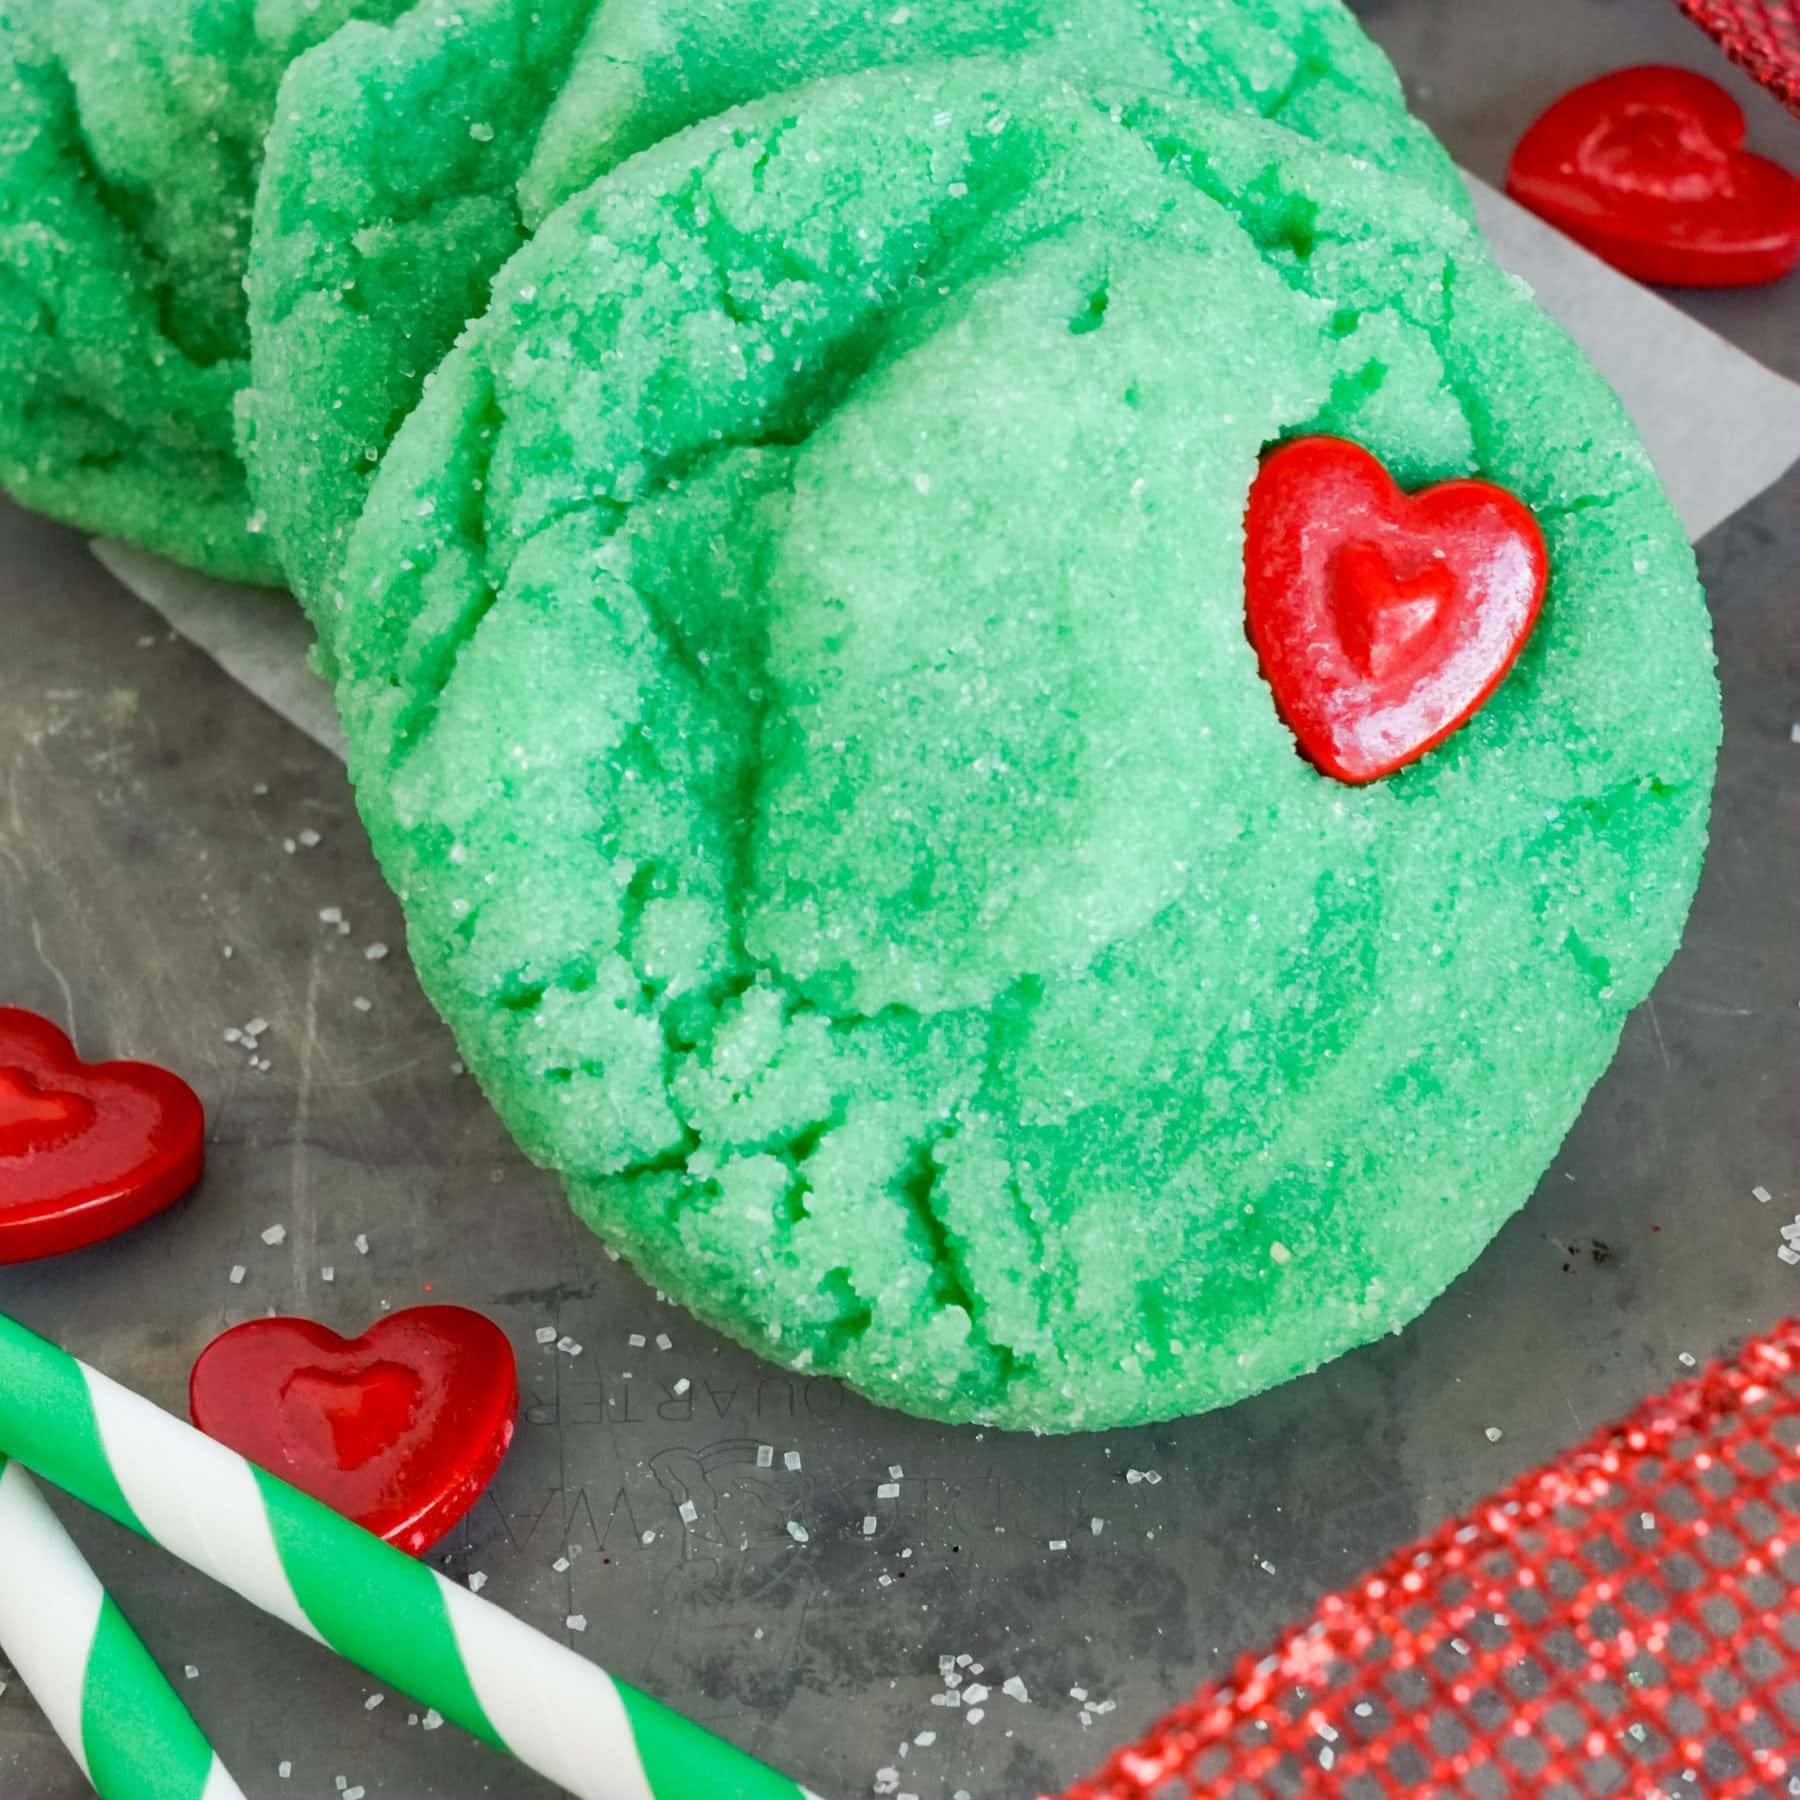 https://kitchenfunwithmy3sons.com/wp-content/uploads/2022/12/grinch-cookies-feature.jpg